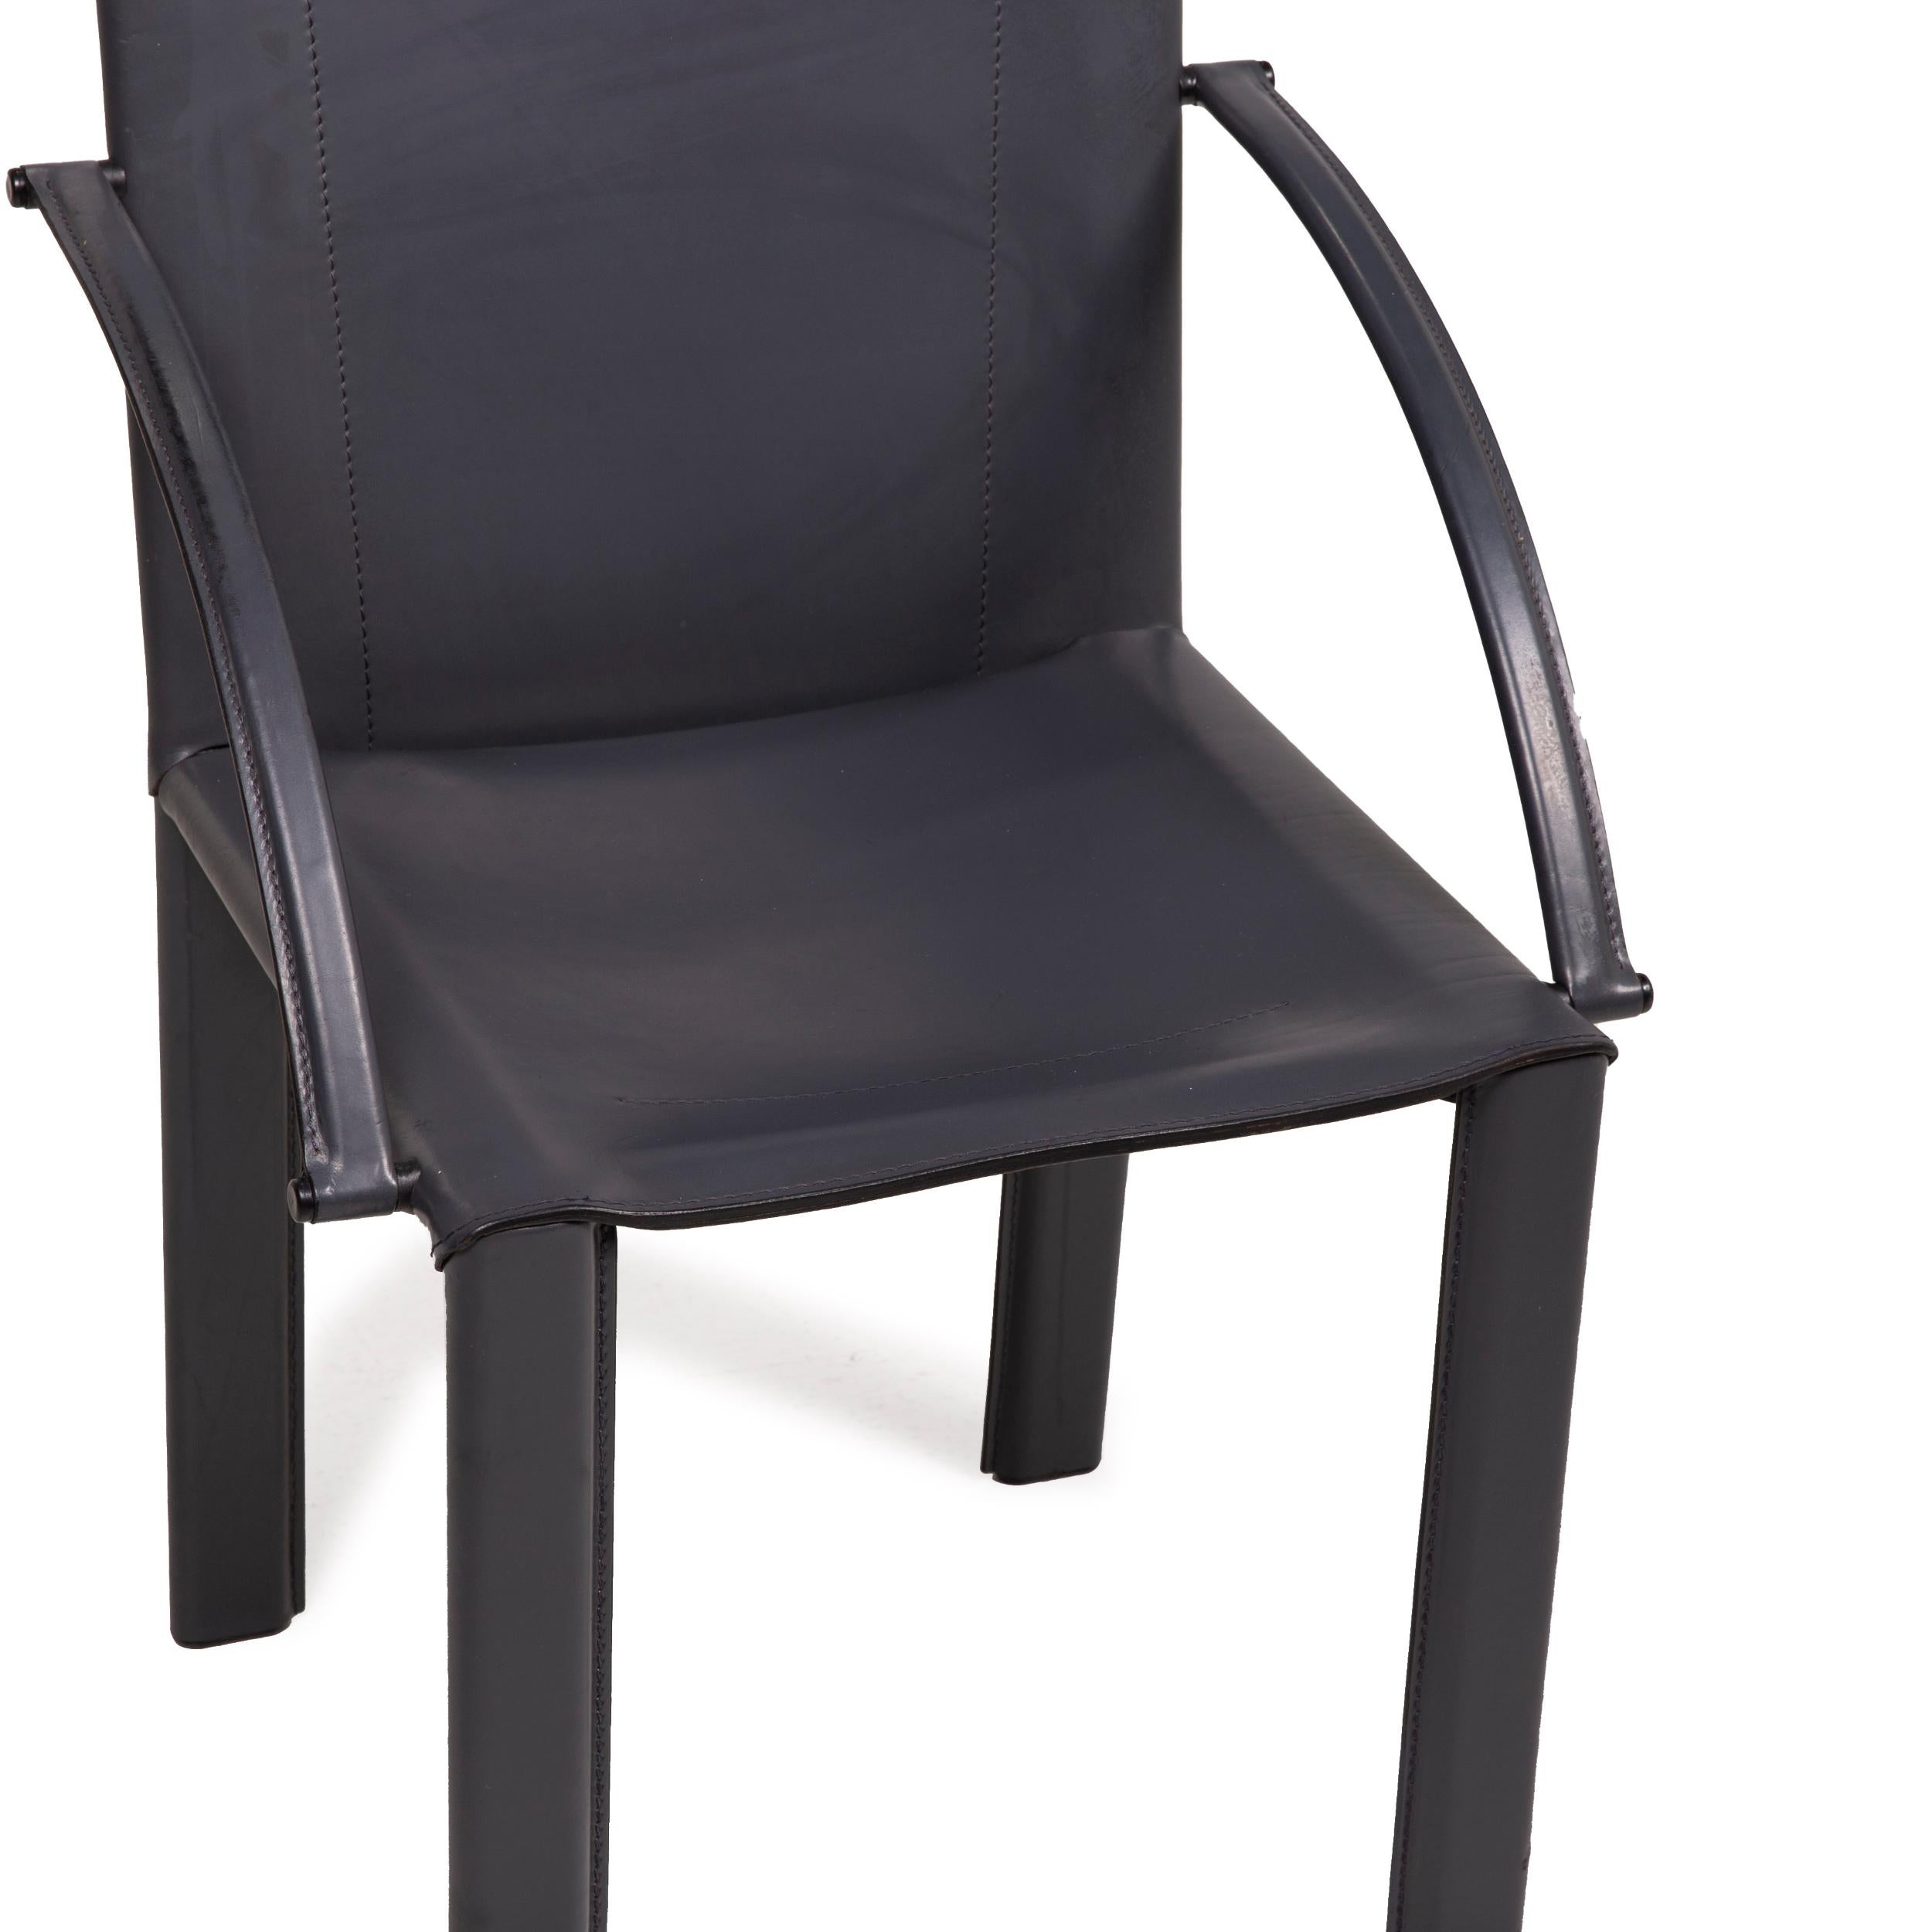 Modern Matteo Grassi Leather Chair Black Vintage Armchair For Sale